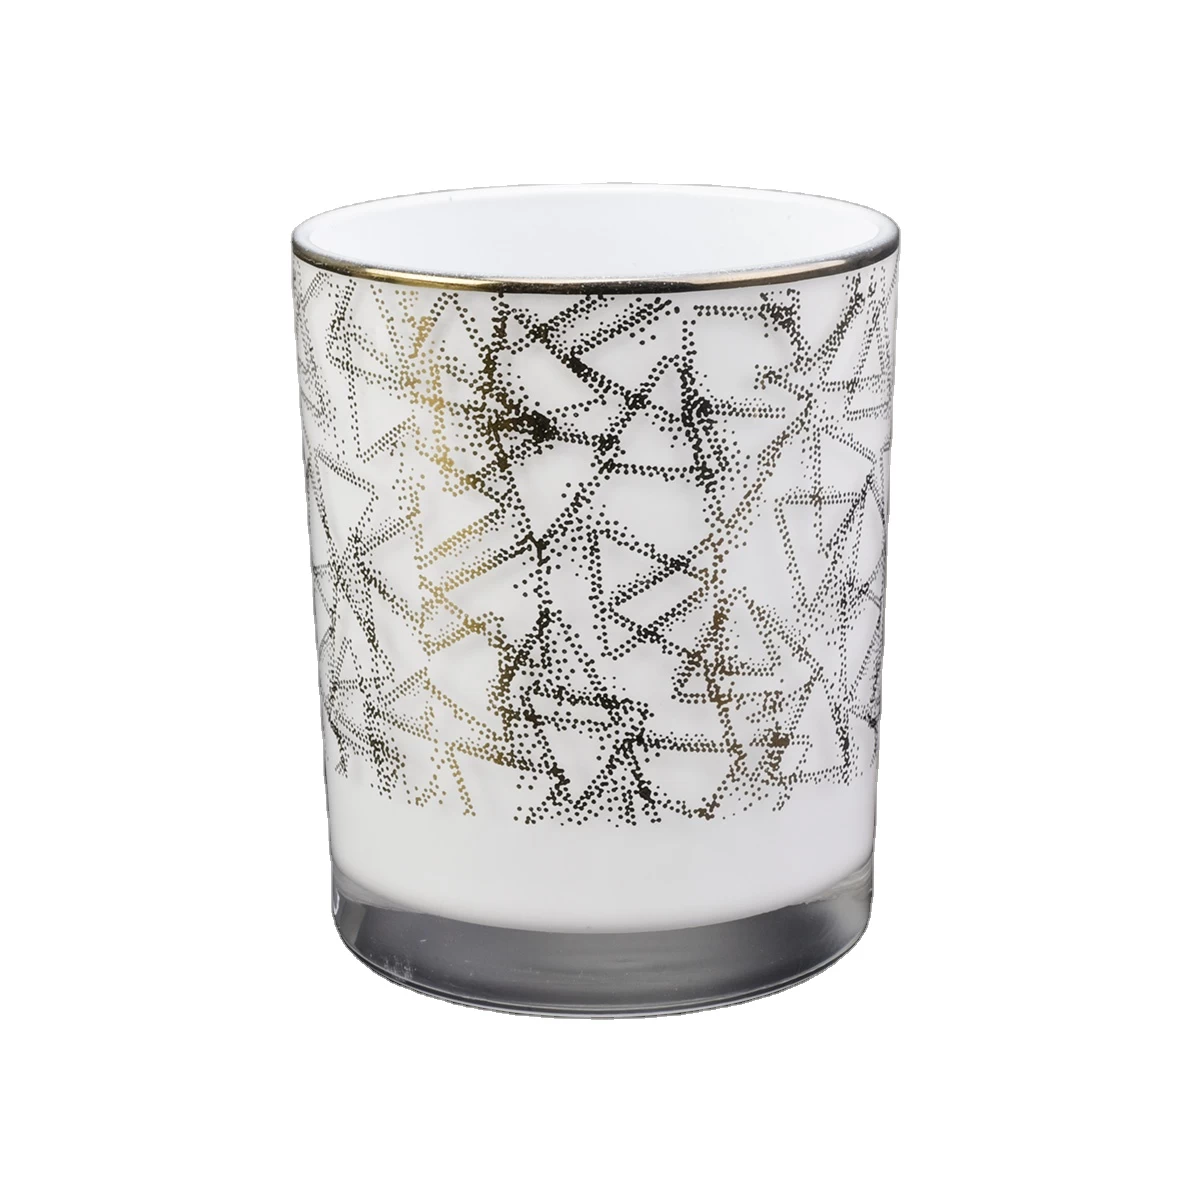 white candle jar with gold shiny rim, luxury glass candle holder